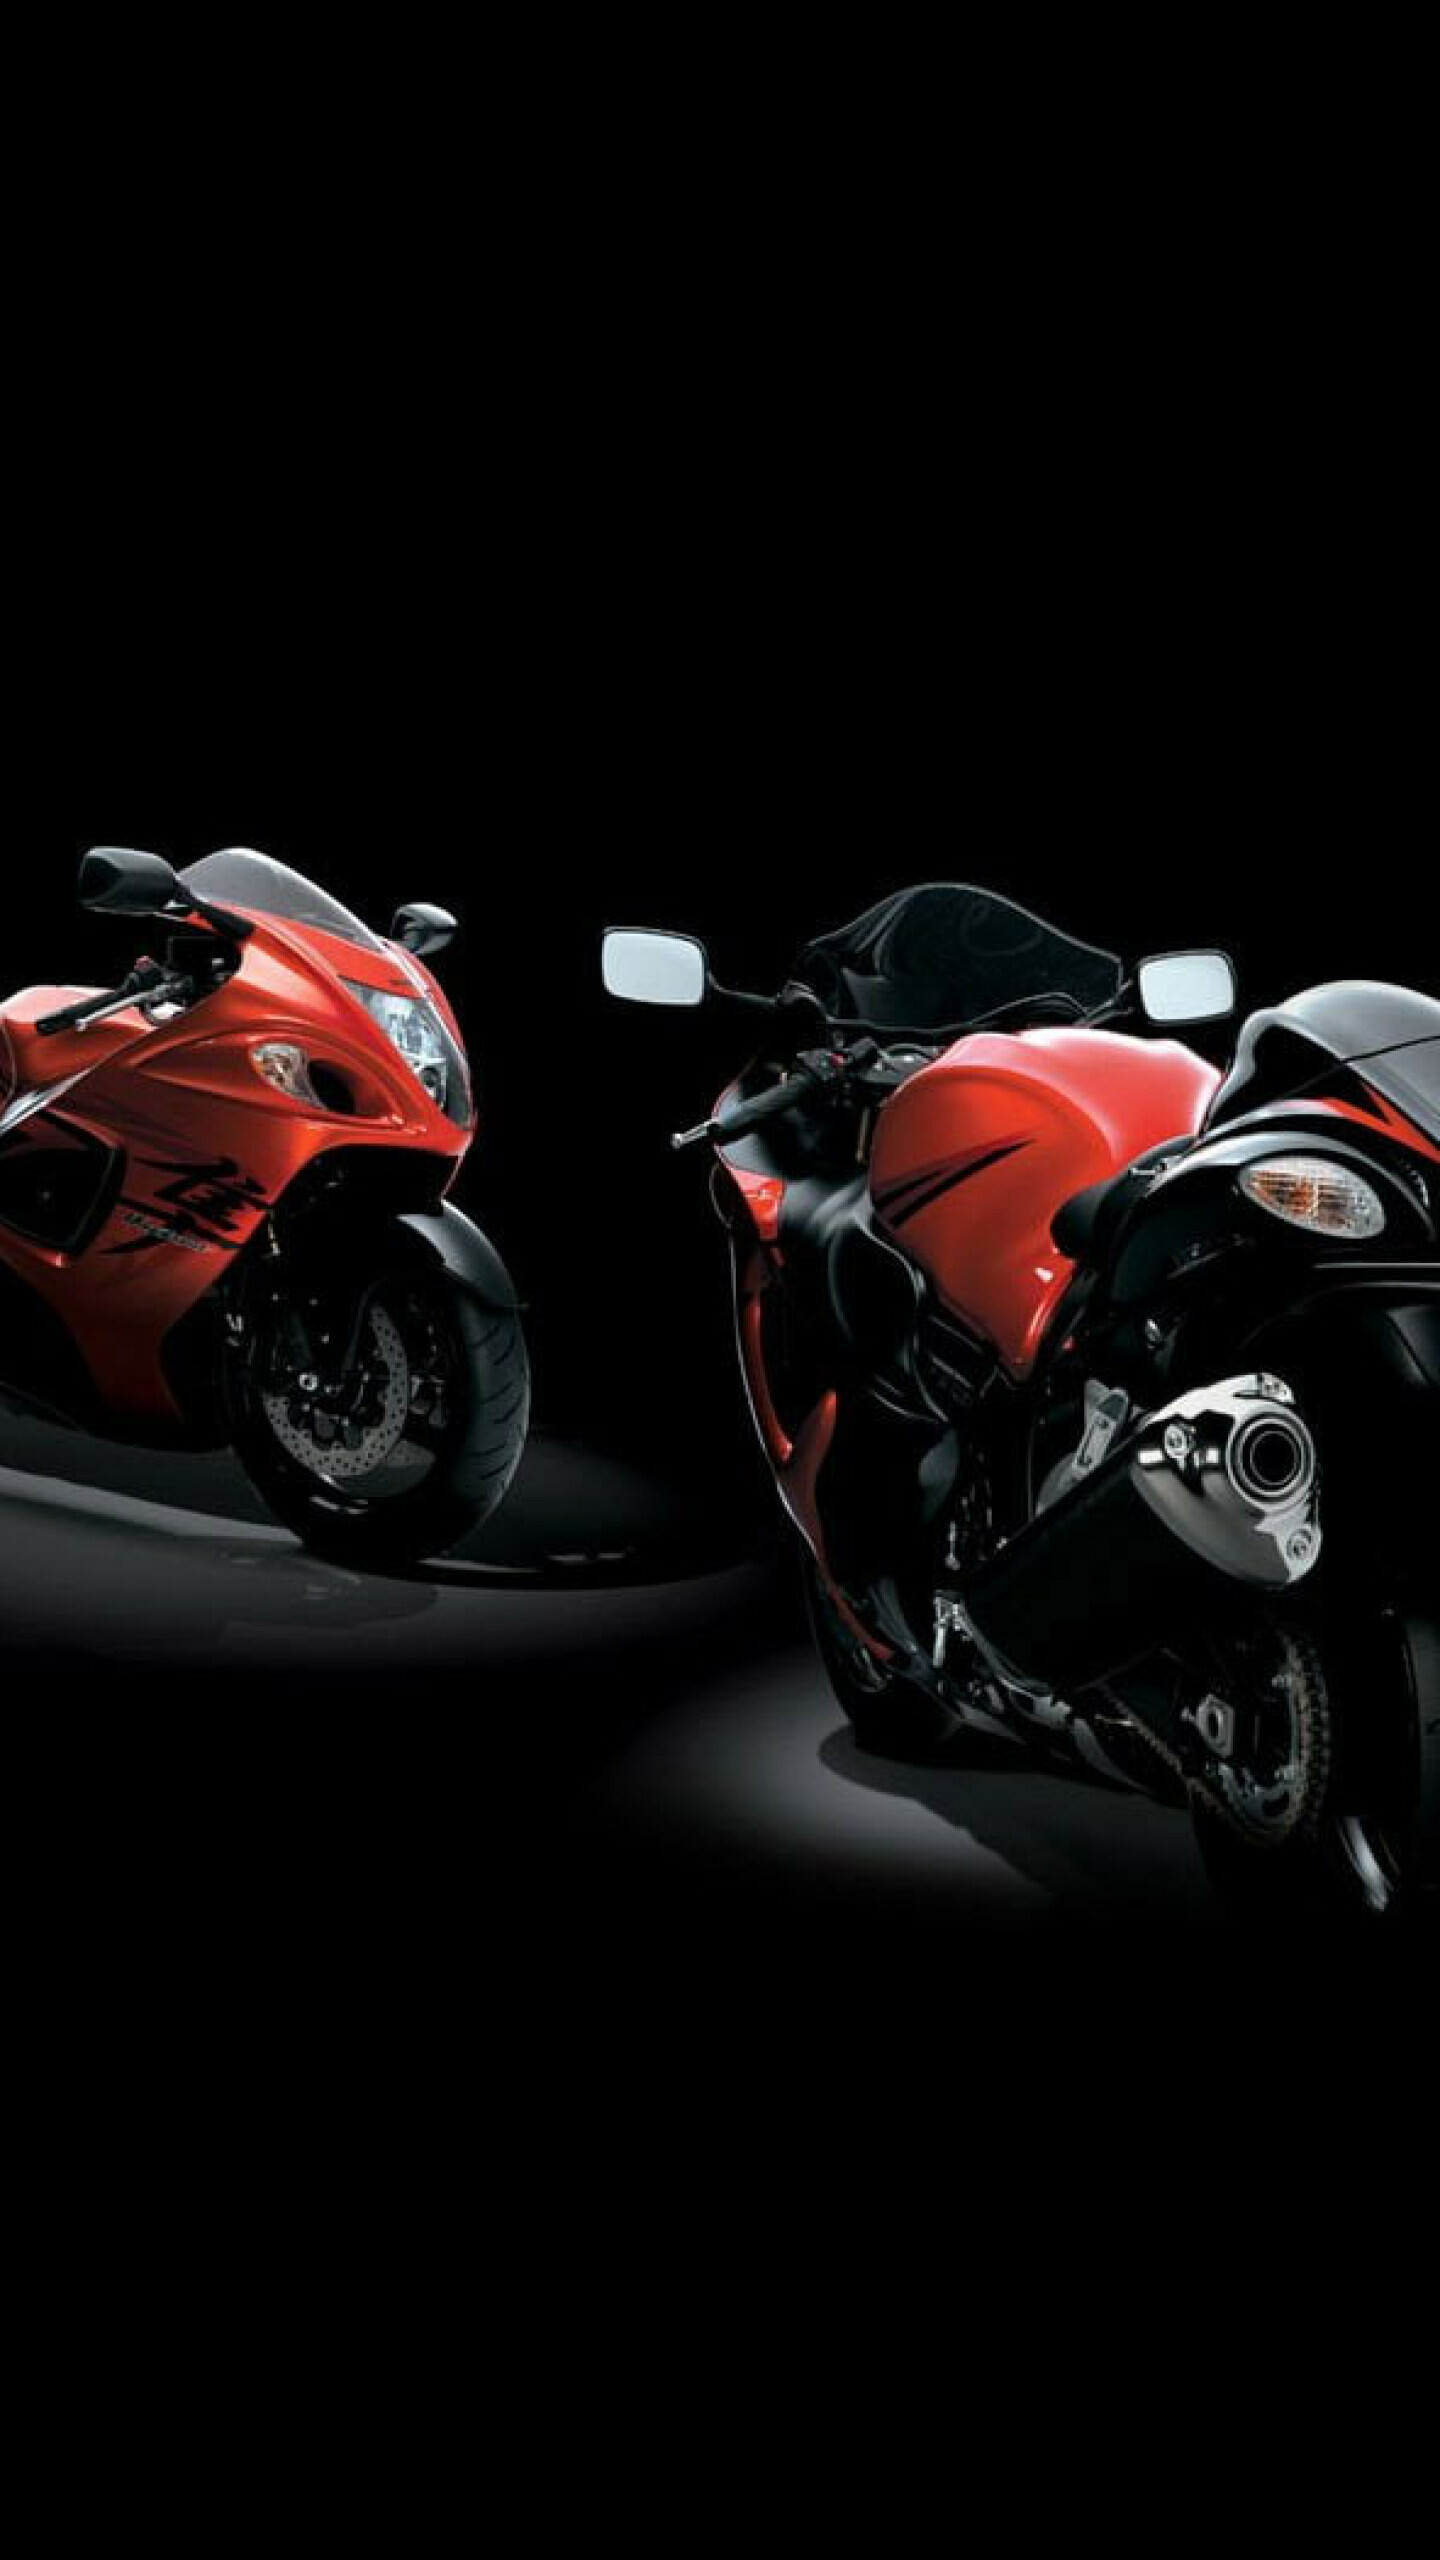 Suzuki Hayabusa: Japanese motorbike, Won acclaim as the world's fastest production motorcycle, with a top speed of 303 to 312 km/h. 1440x2560 HD Background.